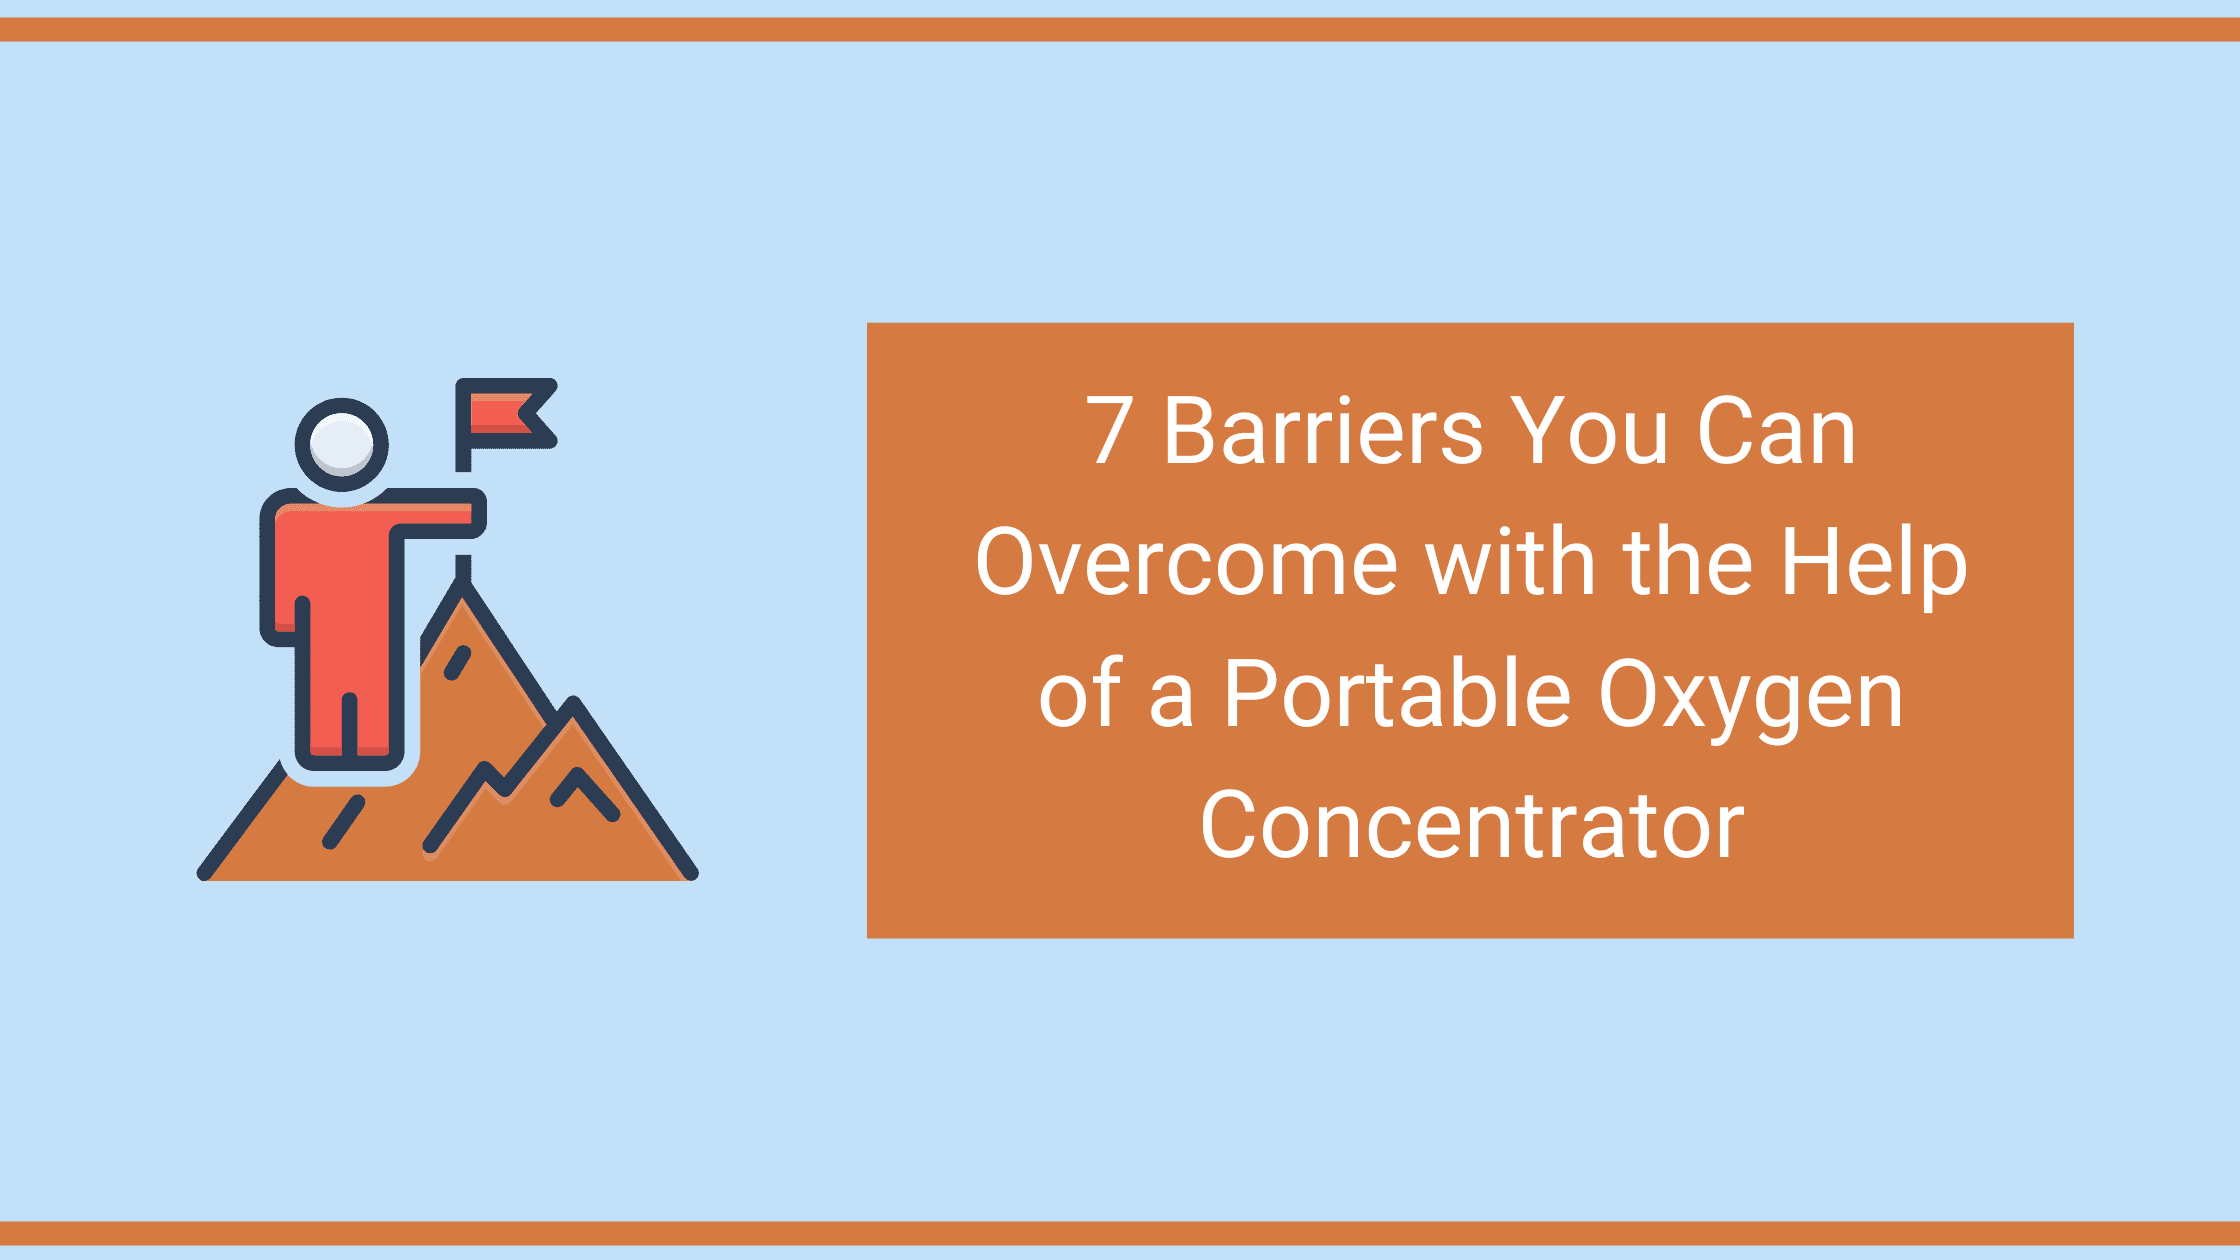 7 Barriers You Can Overcome with the Help of a Portable Oxygen Concentrator